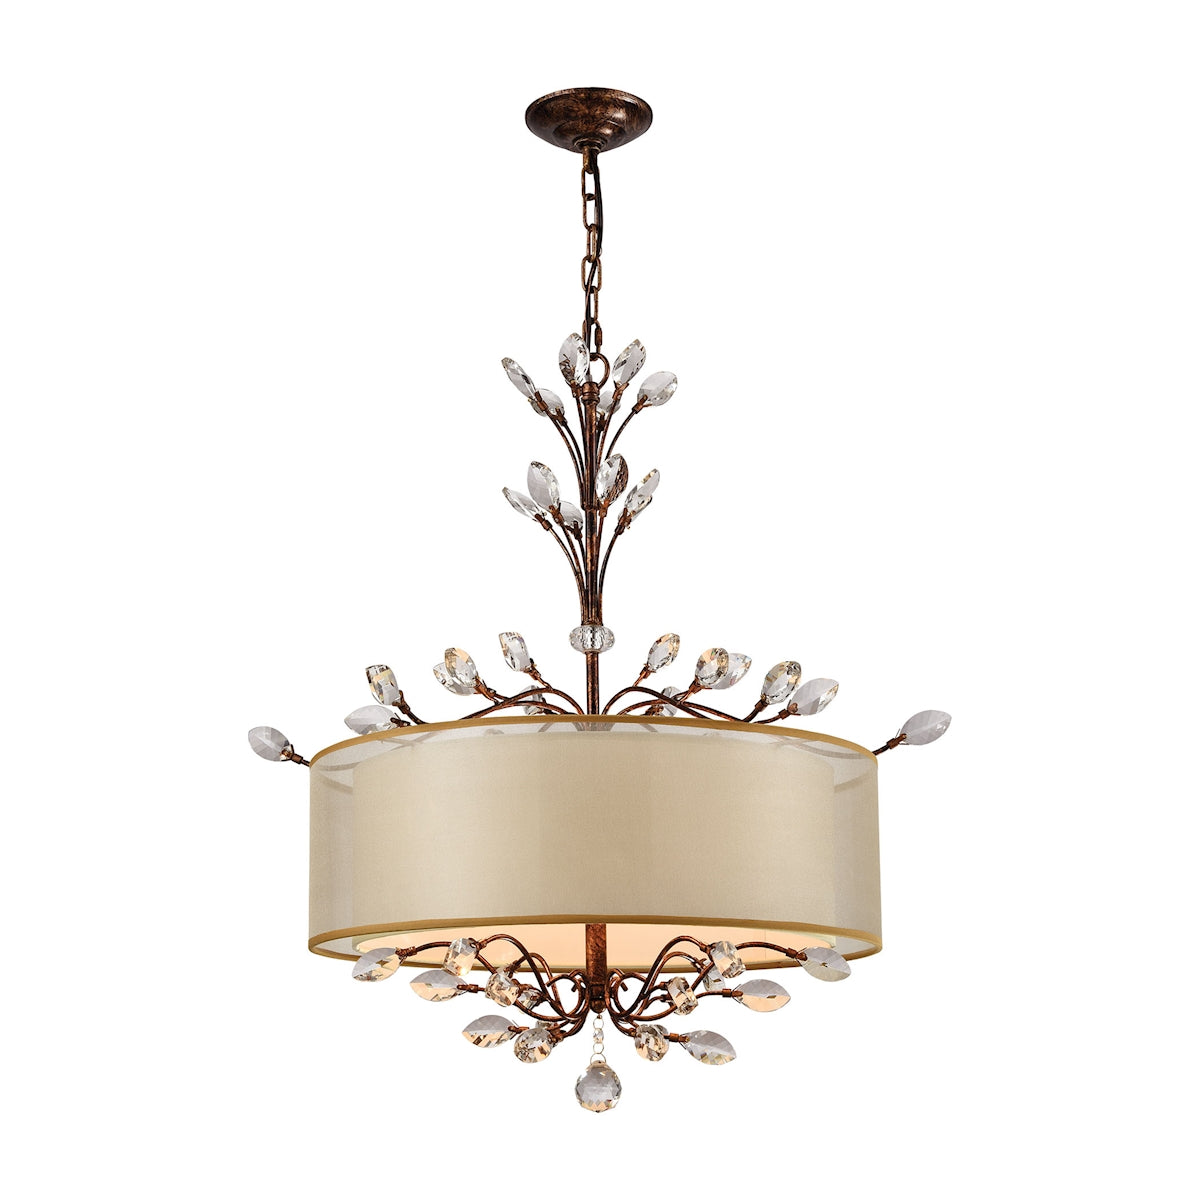 ELK Lighting 16292/4 Asbury 4-Light Chandelier in Spanish Bronze with Organza and Fabric Shade